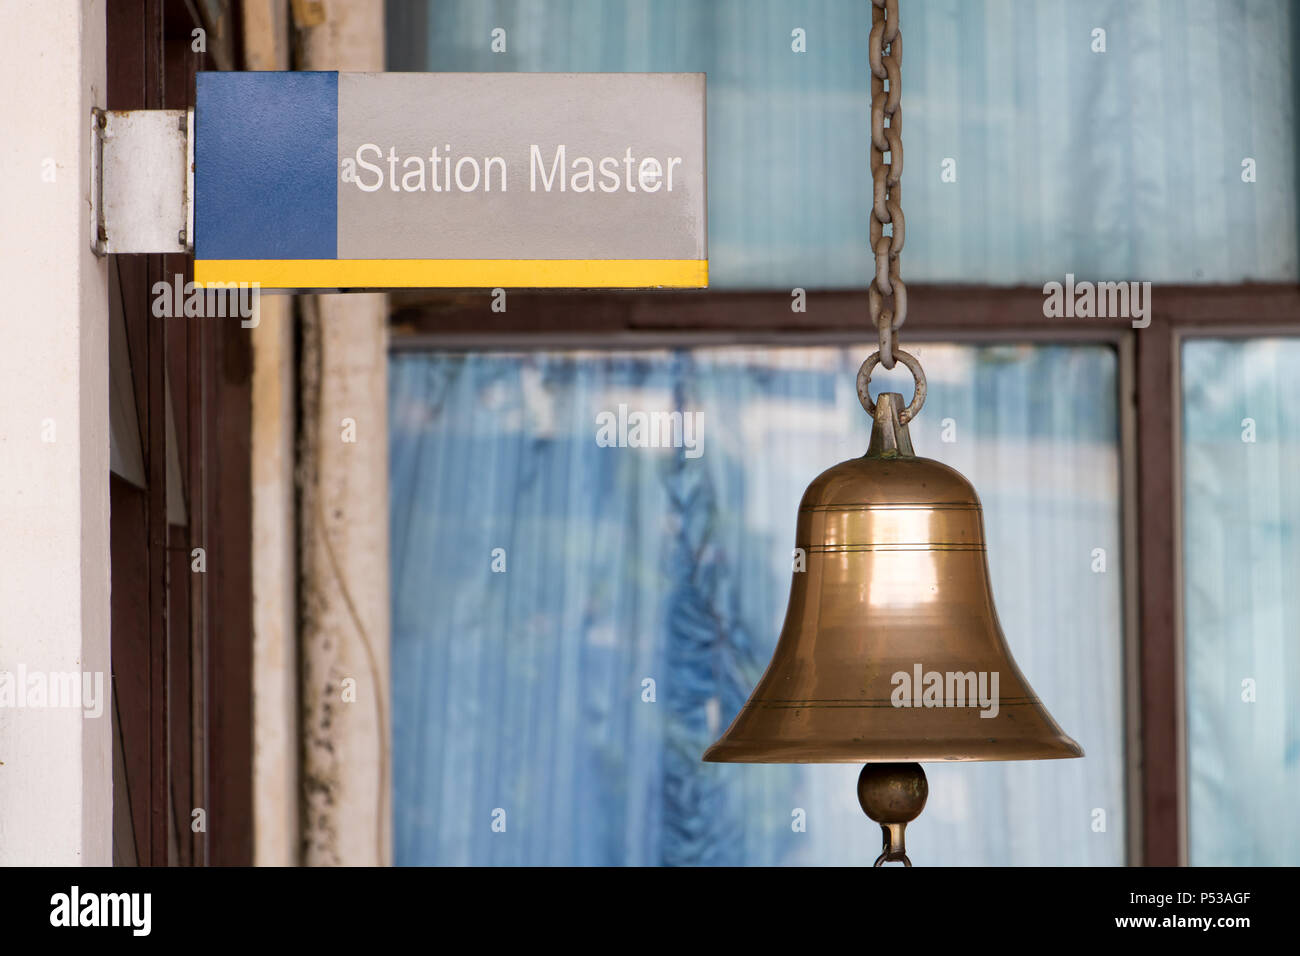 Closeup sign station master with a golden bell in train station. Traditional sound signaling on the platform at the railway station. Stock Photo